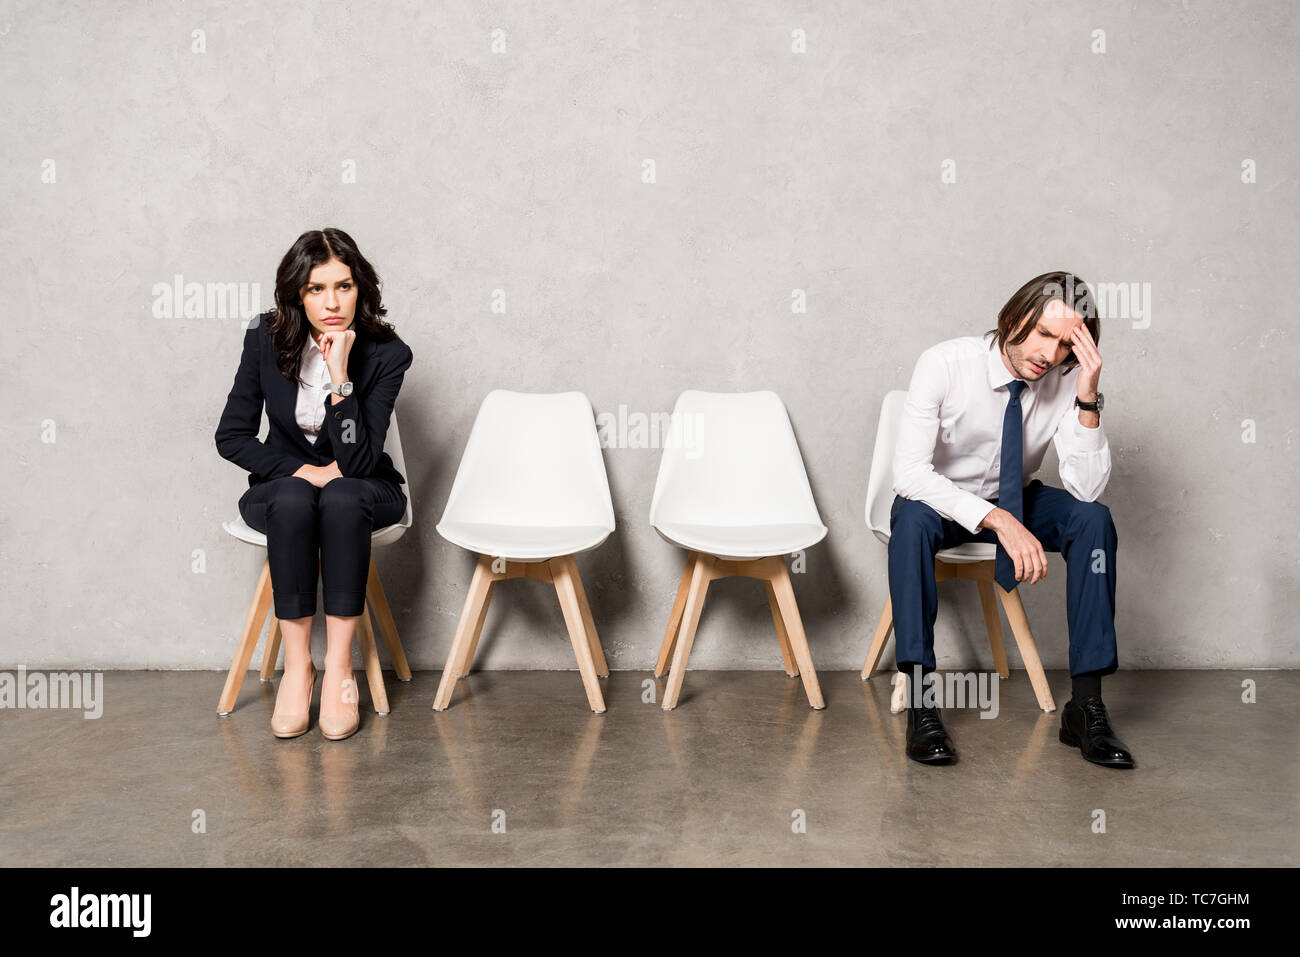 worried man sitting near attractive brunette woman on chair Stock Photo